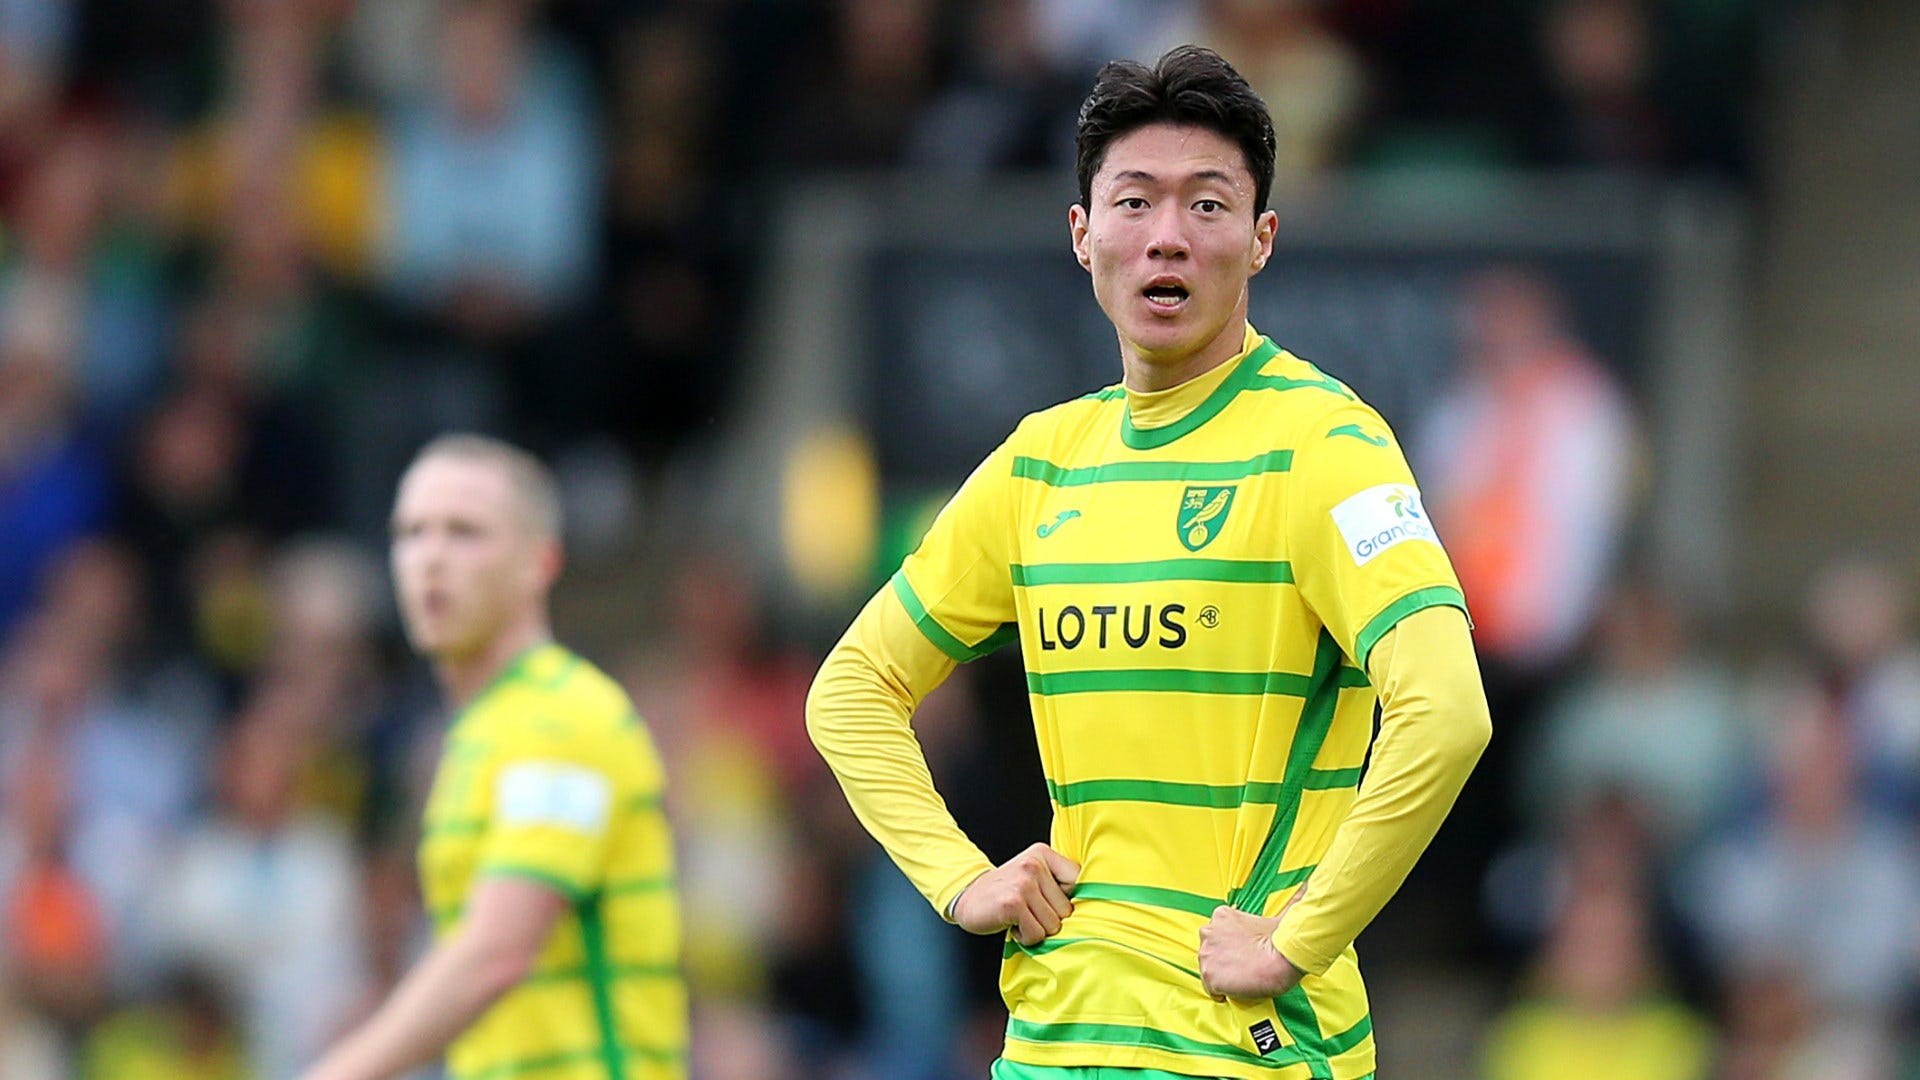 Norwich City striker Hwang Ui-jo suspended by South Korea amid claims he illegally filmed sexual encounter with ex-partner